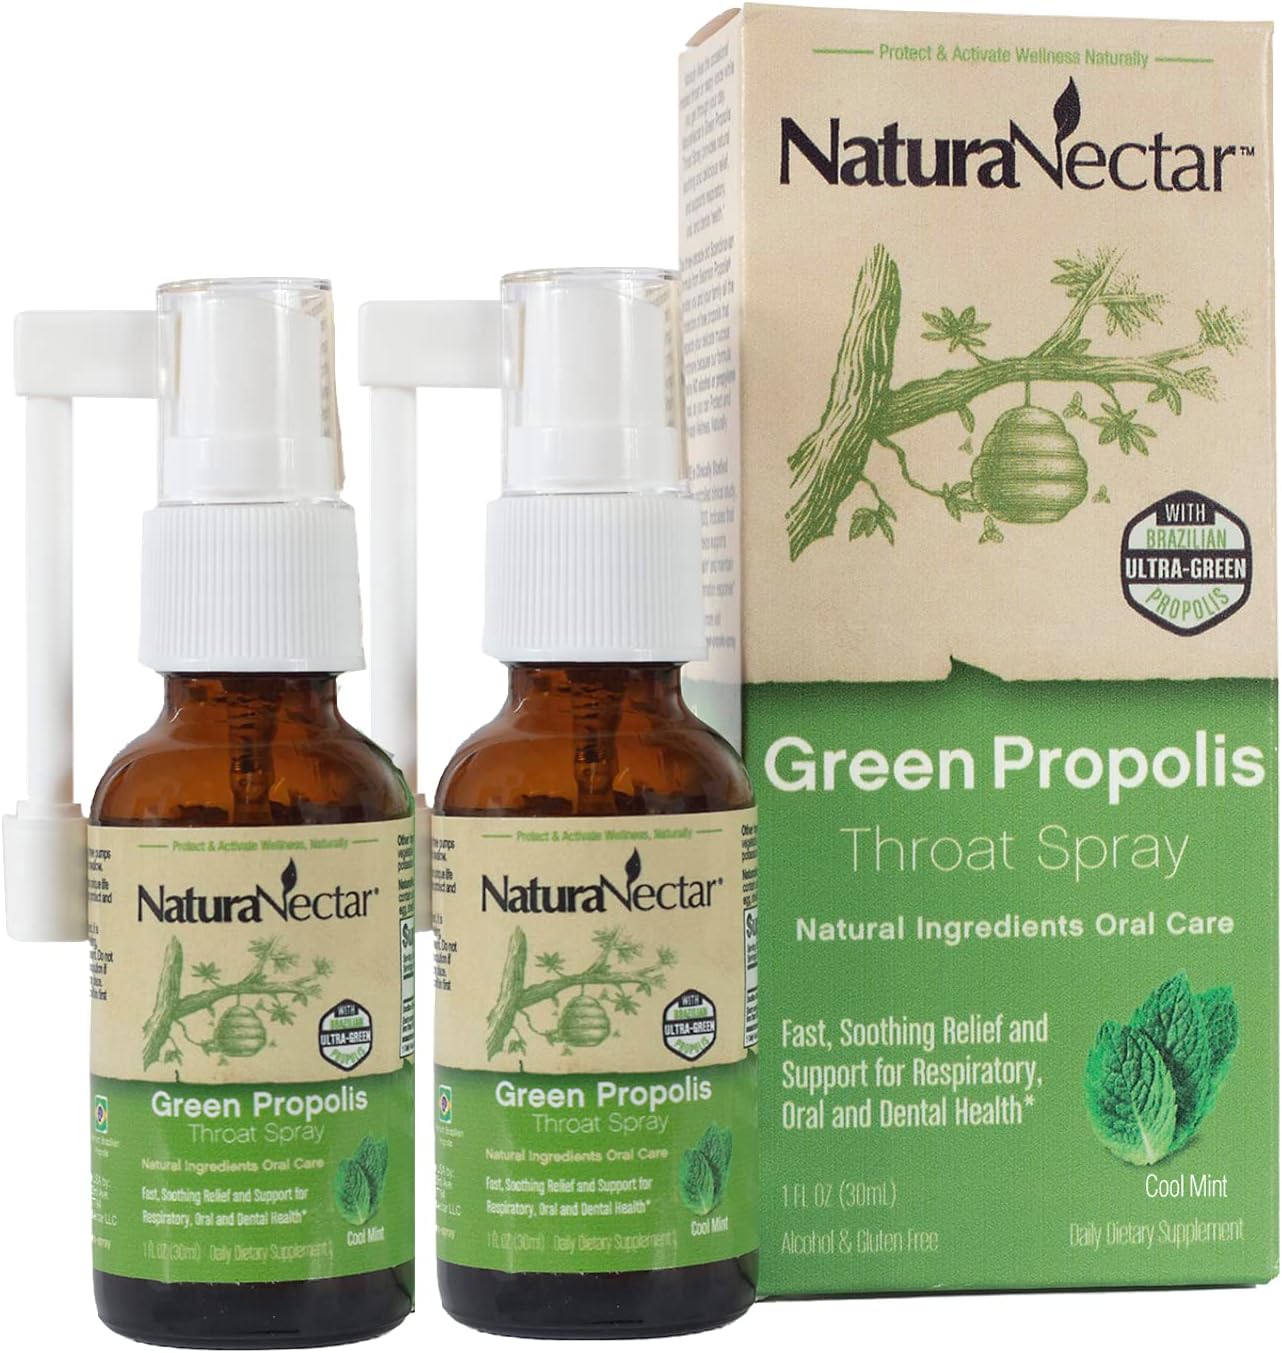 Green Propolis Throat Spray – Organic aromatic acids to support throat* & immune health*. A daily companion for throat comfort. Cool mint flavor | Pack of 2